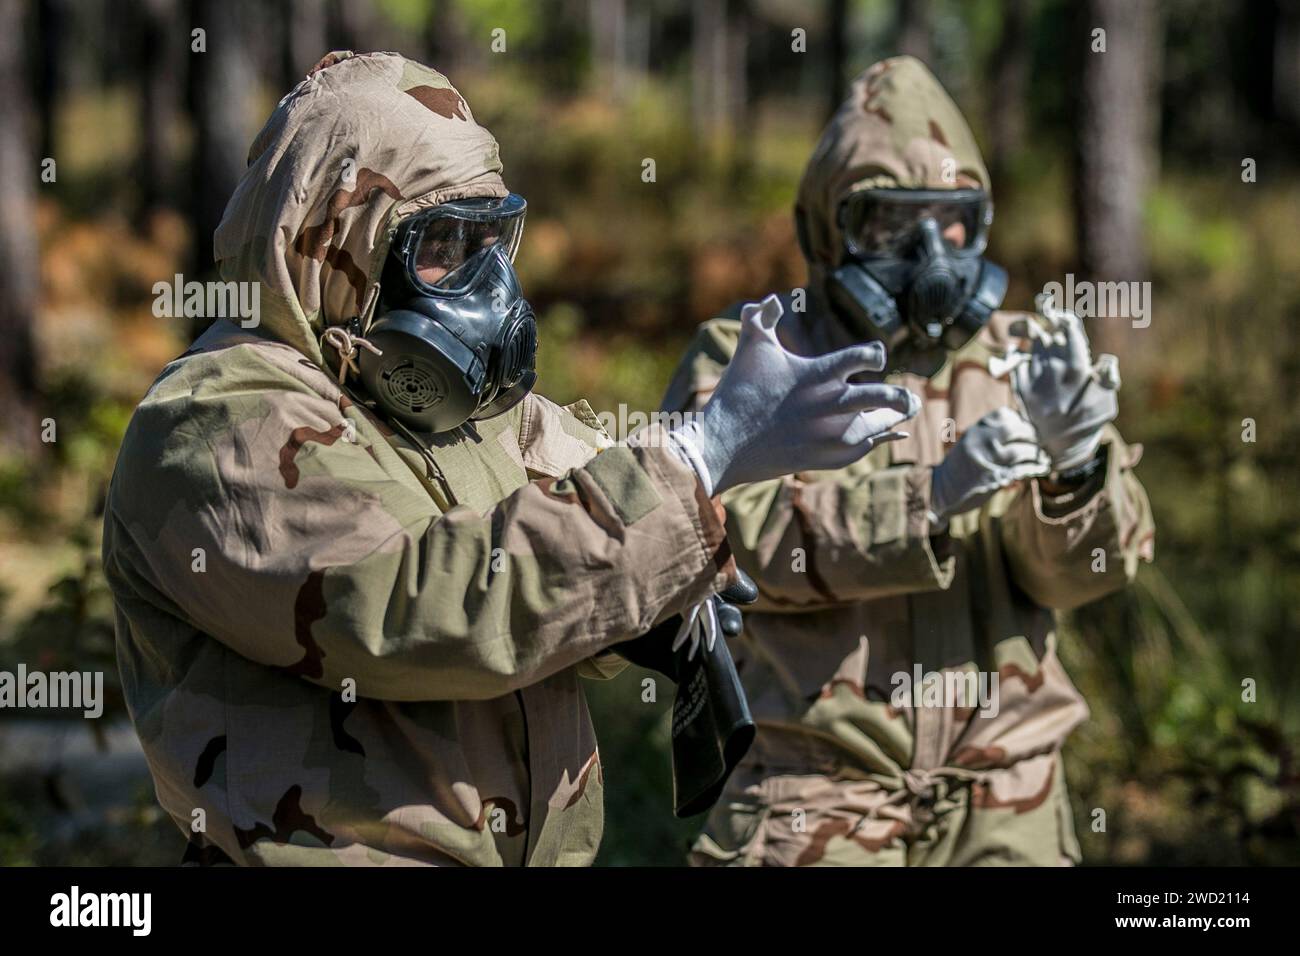 Soldiers donning and removing protective gear used during Chemical, Biological, Radiological and Nuclear attacks. Stock Photo